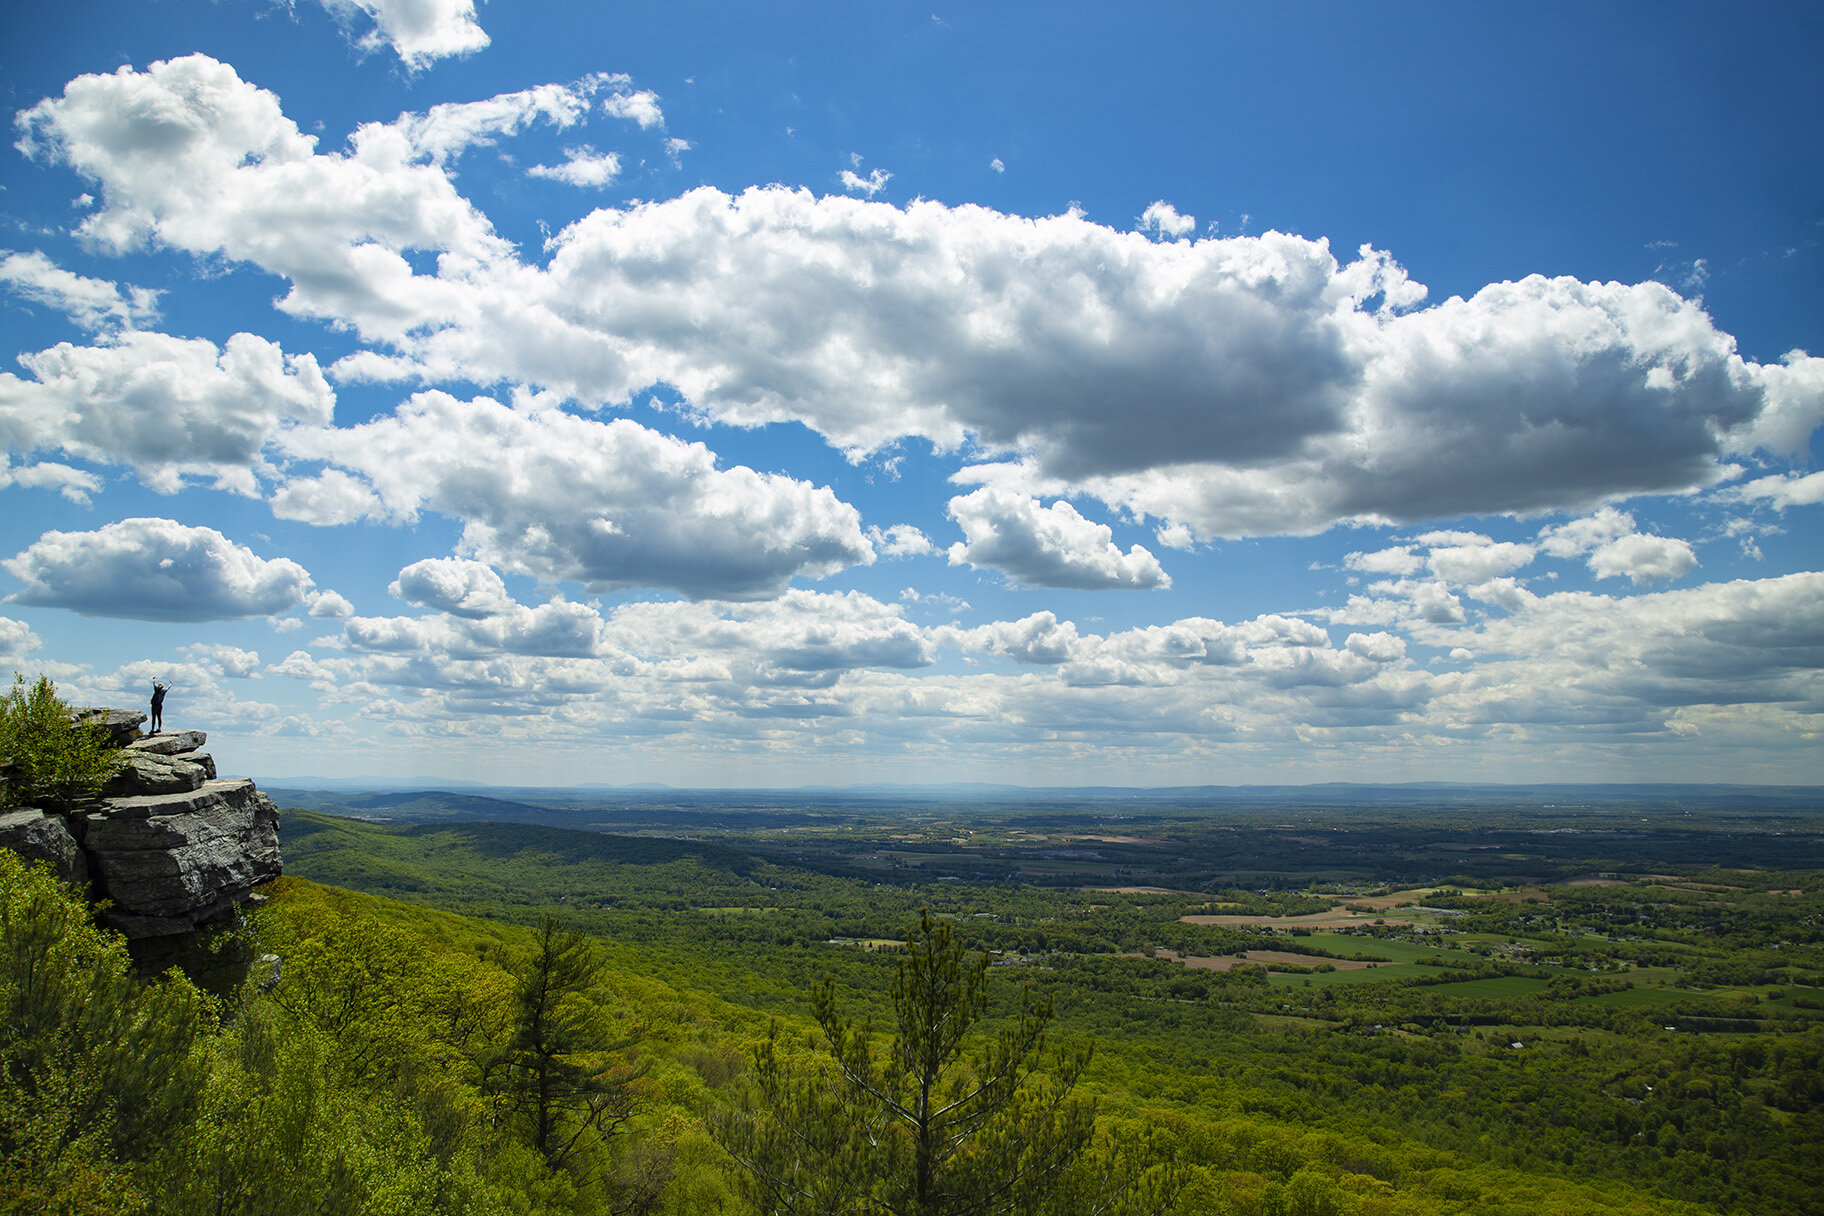  Black Rock overlook on the Appalachian Trail, Hagerstown, Maryland 